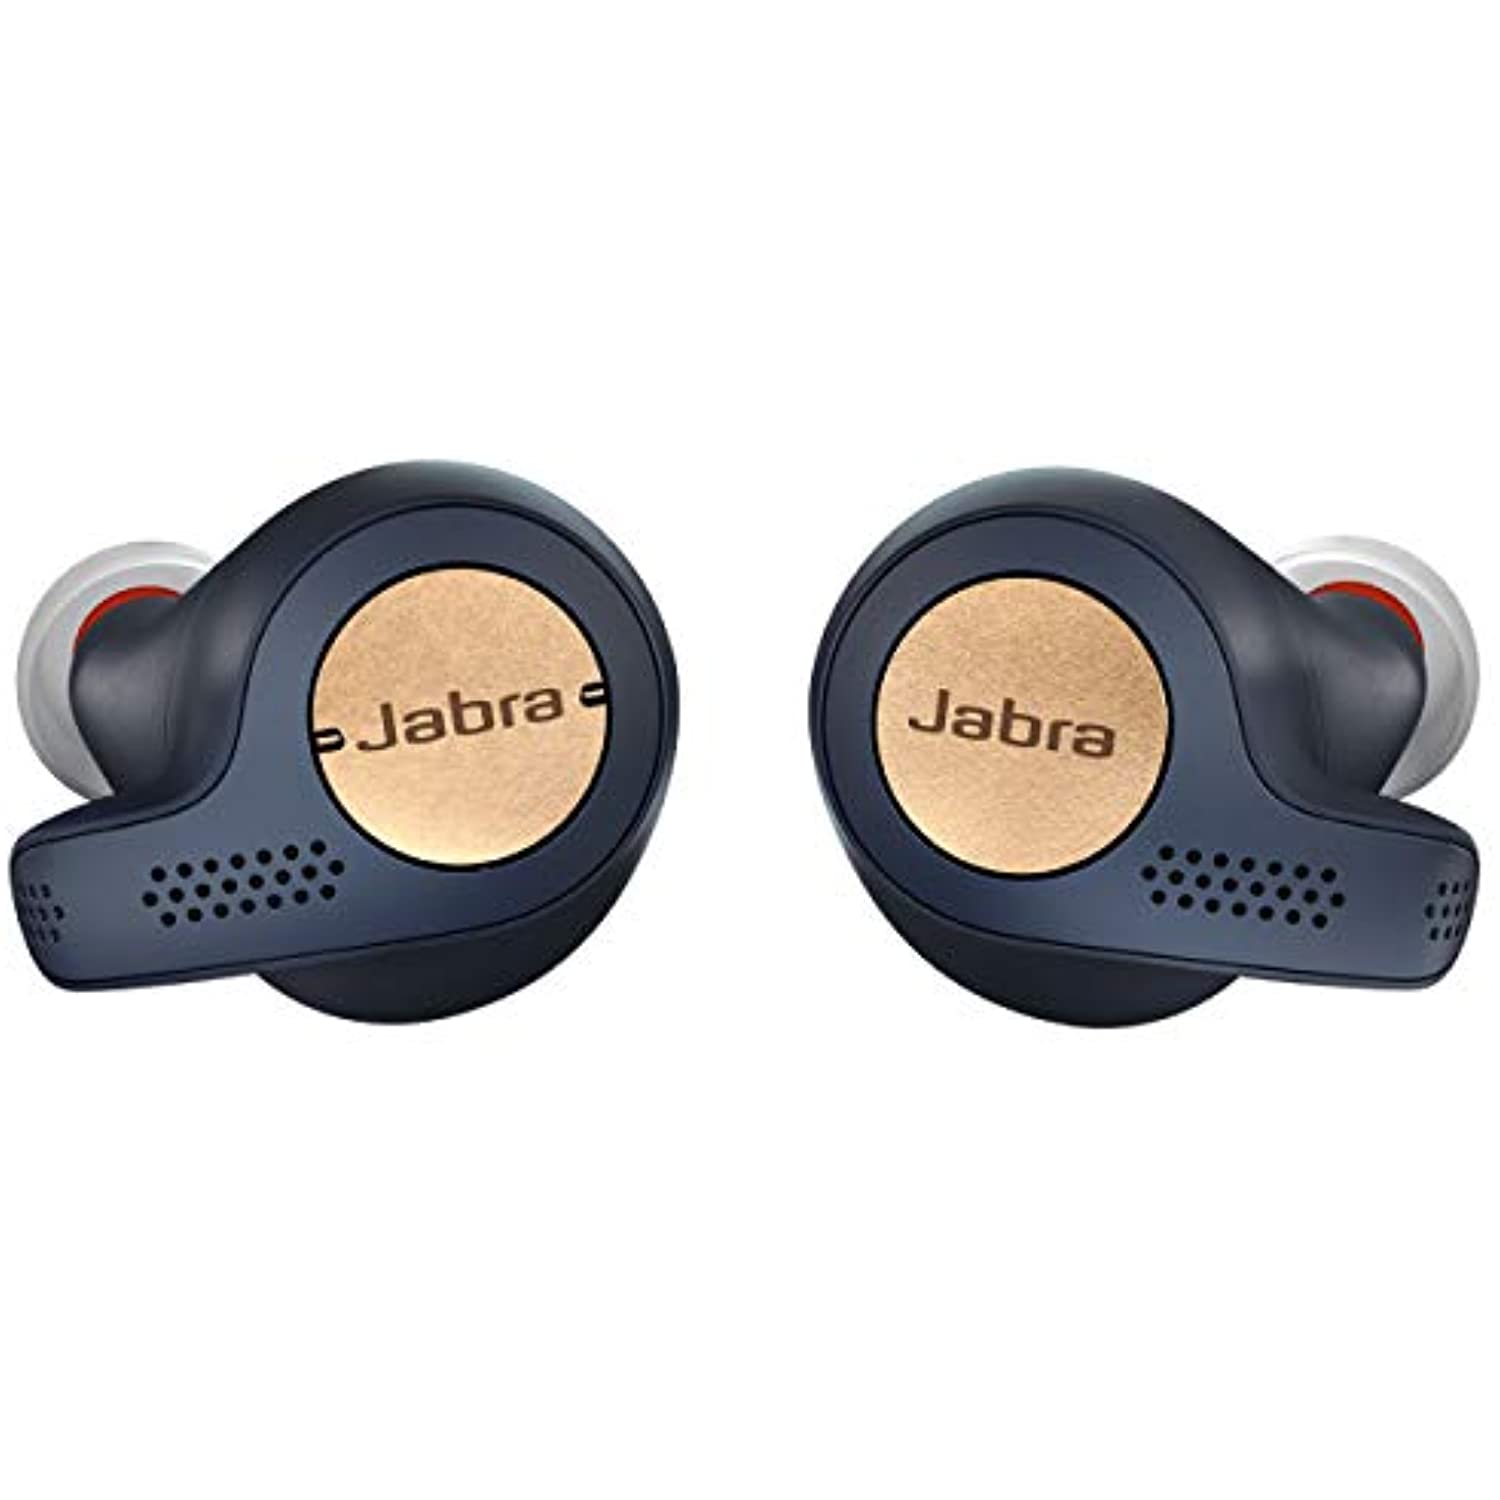 Jabra - 100-99010000-02 Elite Active 65t Earbuds True Wireless Earbuds with Charging Case Bluetooth Earbuds with a Secure Fit and Superior Sound, Long Battery Life and More - Copper Blue